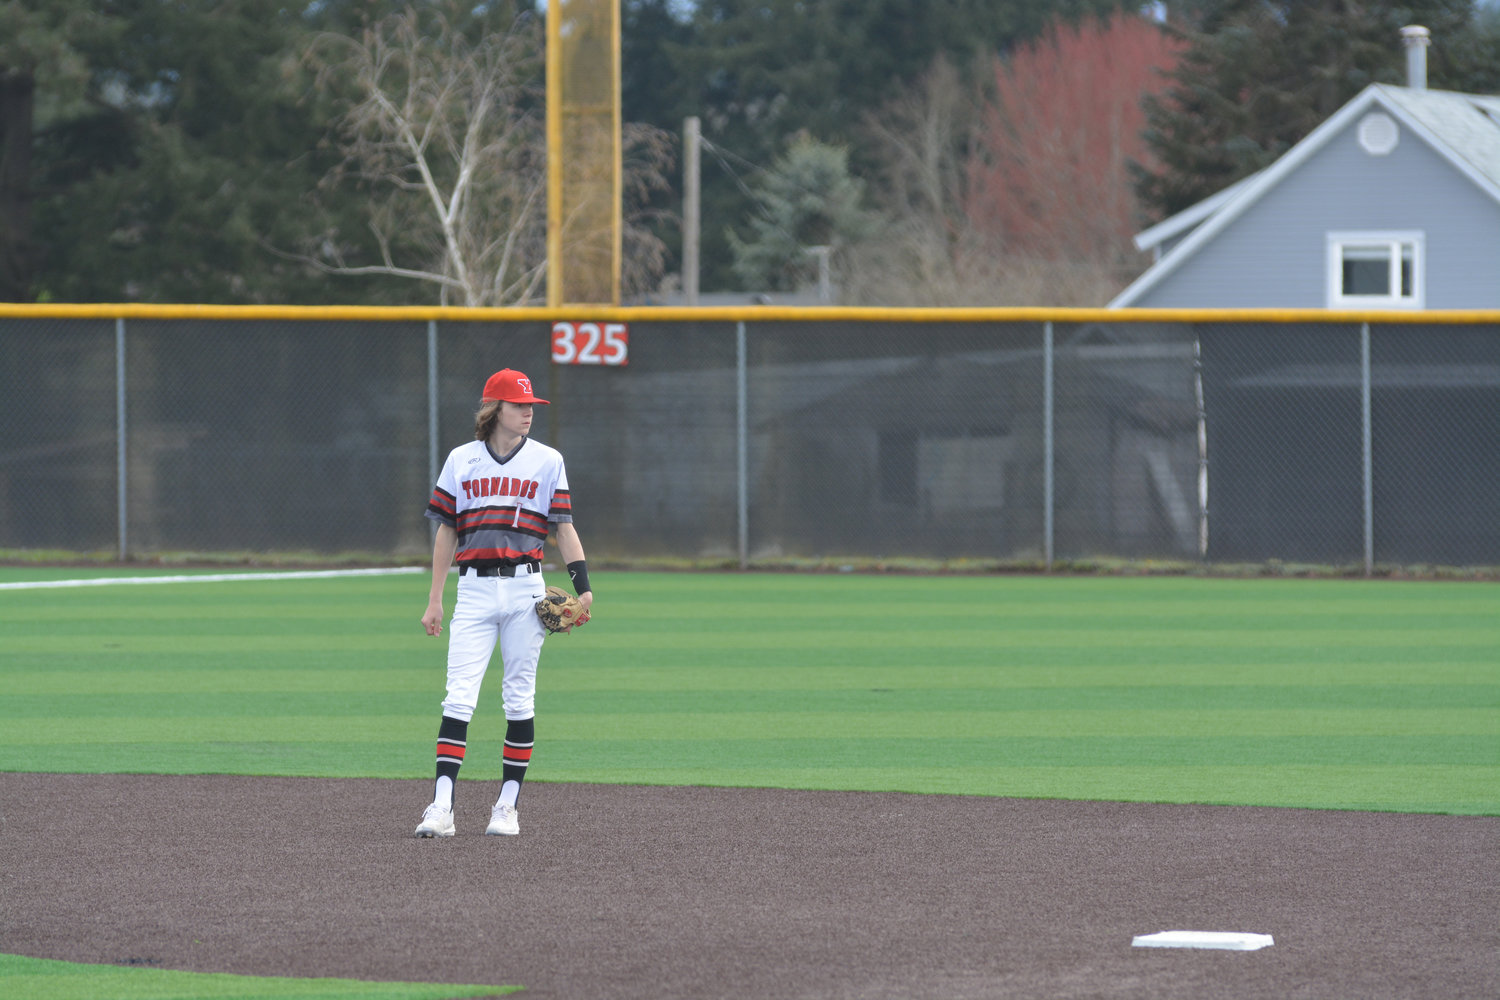 Senior infielder Kyle Olmstead communicates with the second baseman in between pitches on Friday, April 1 during a game against Steilacoom High School.